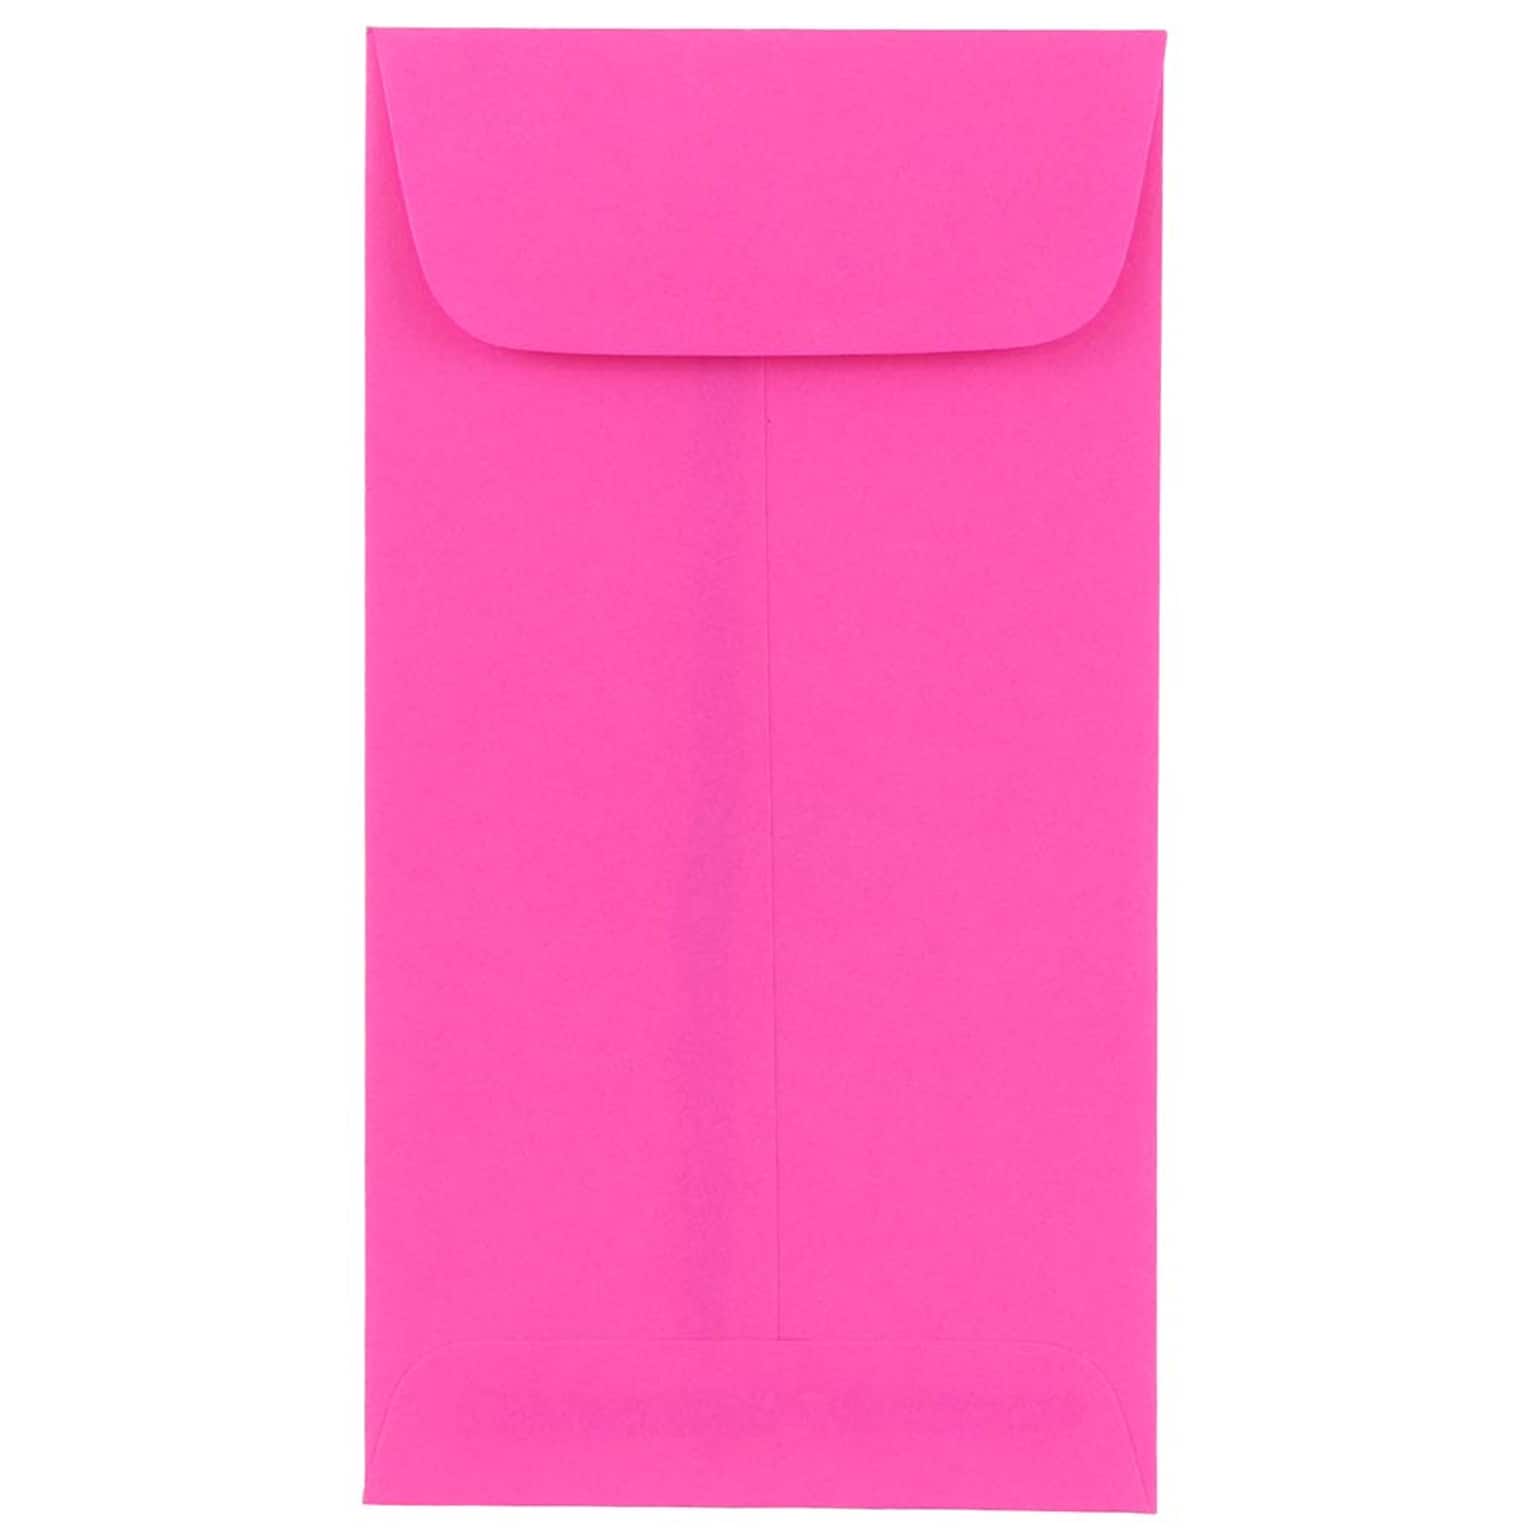 JAM Paper #7 Coin Business Colored Envelopes, 3.5 x 6.5, Ultra Fuchsia Pink, 25/Pack (1526767)